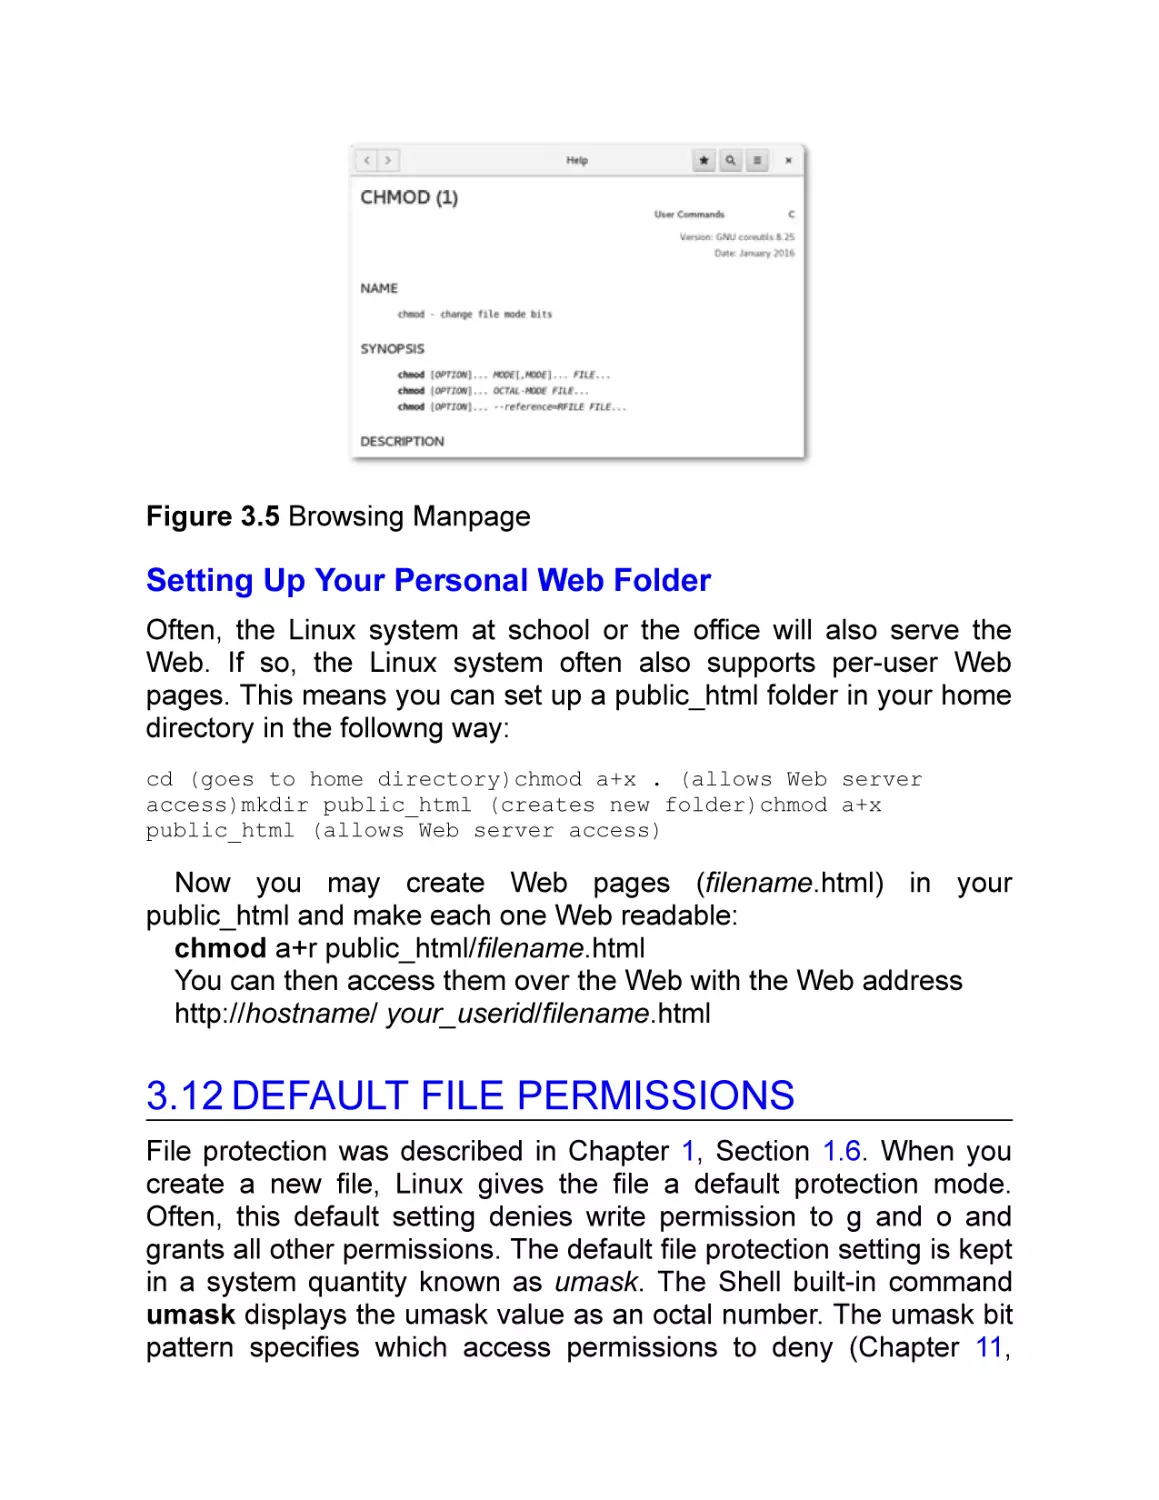 Setting Up Your Personal Web Folder
3.12 Default File Permissions